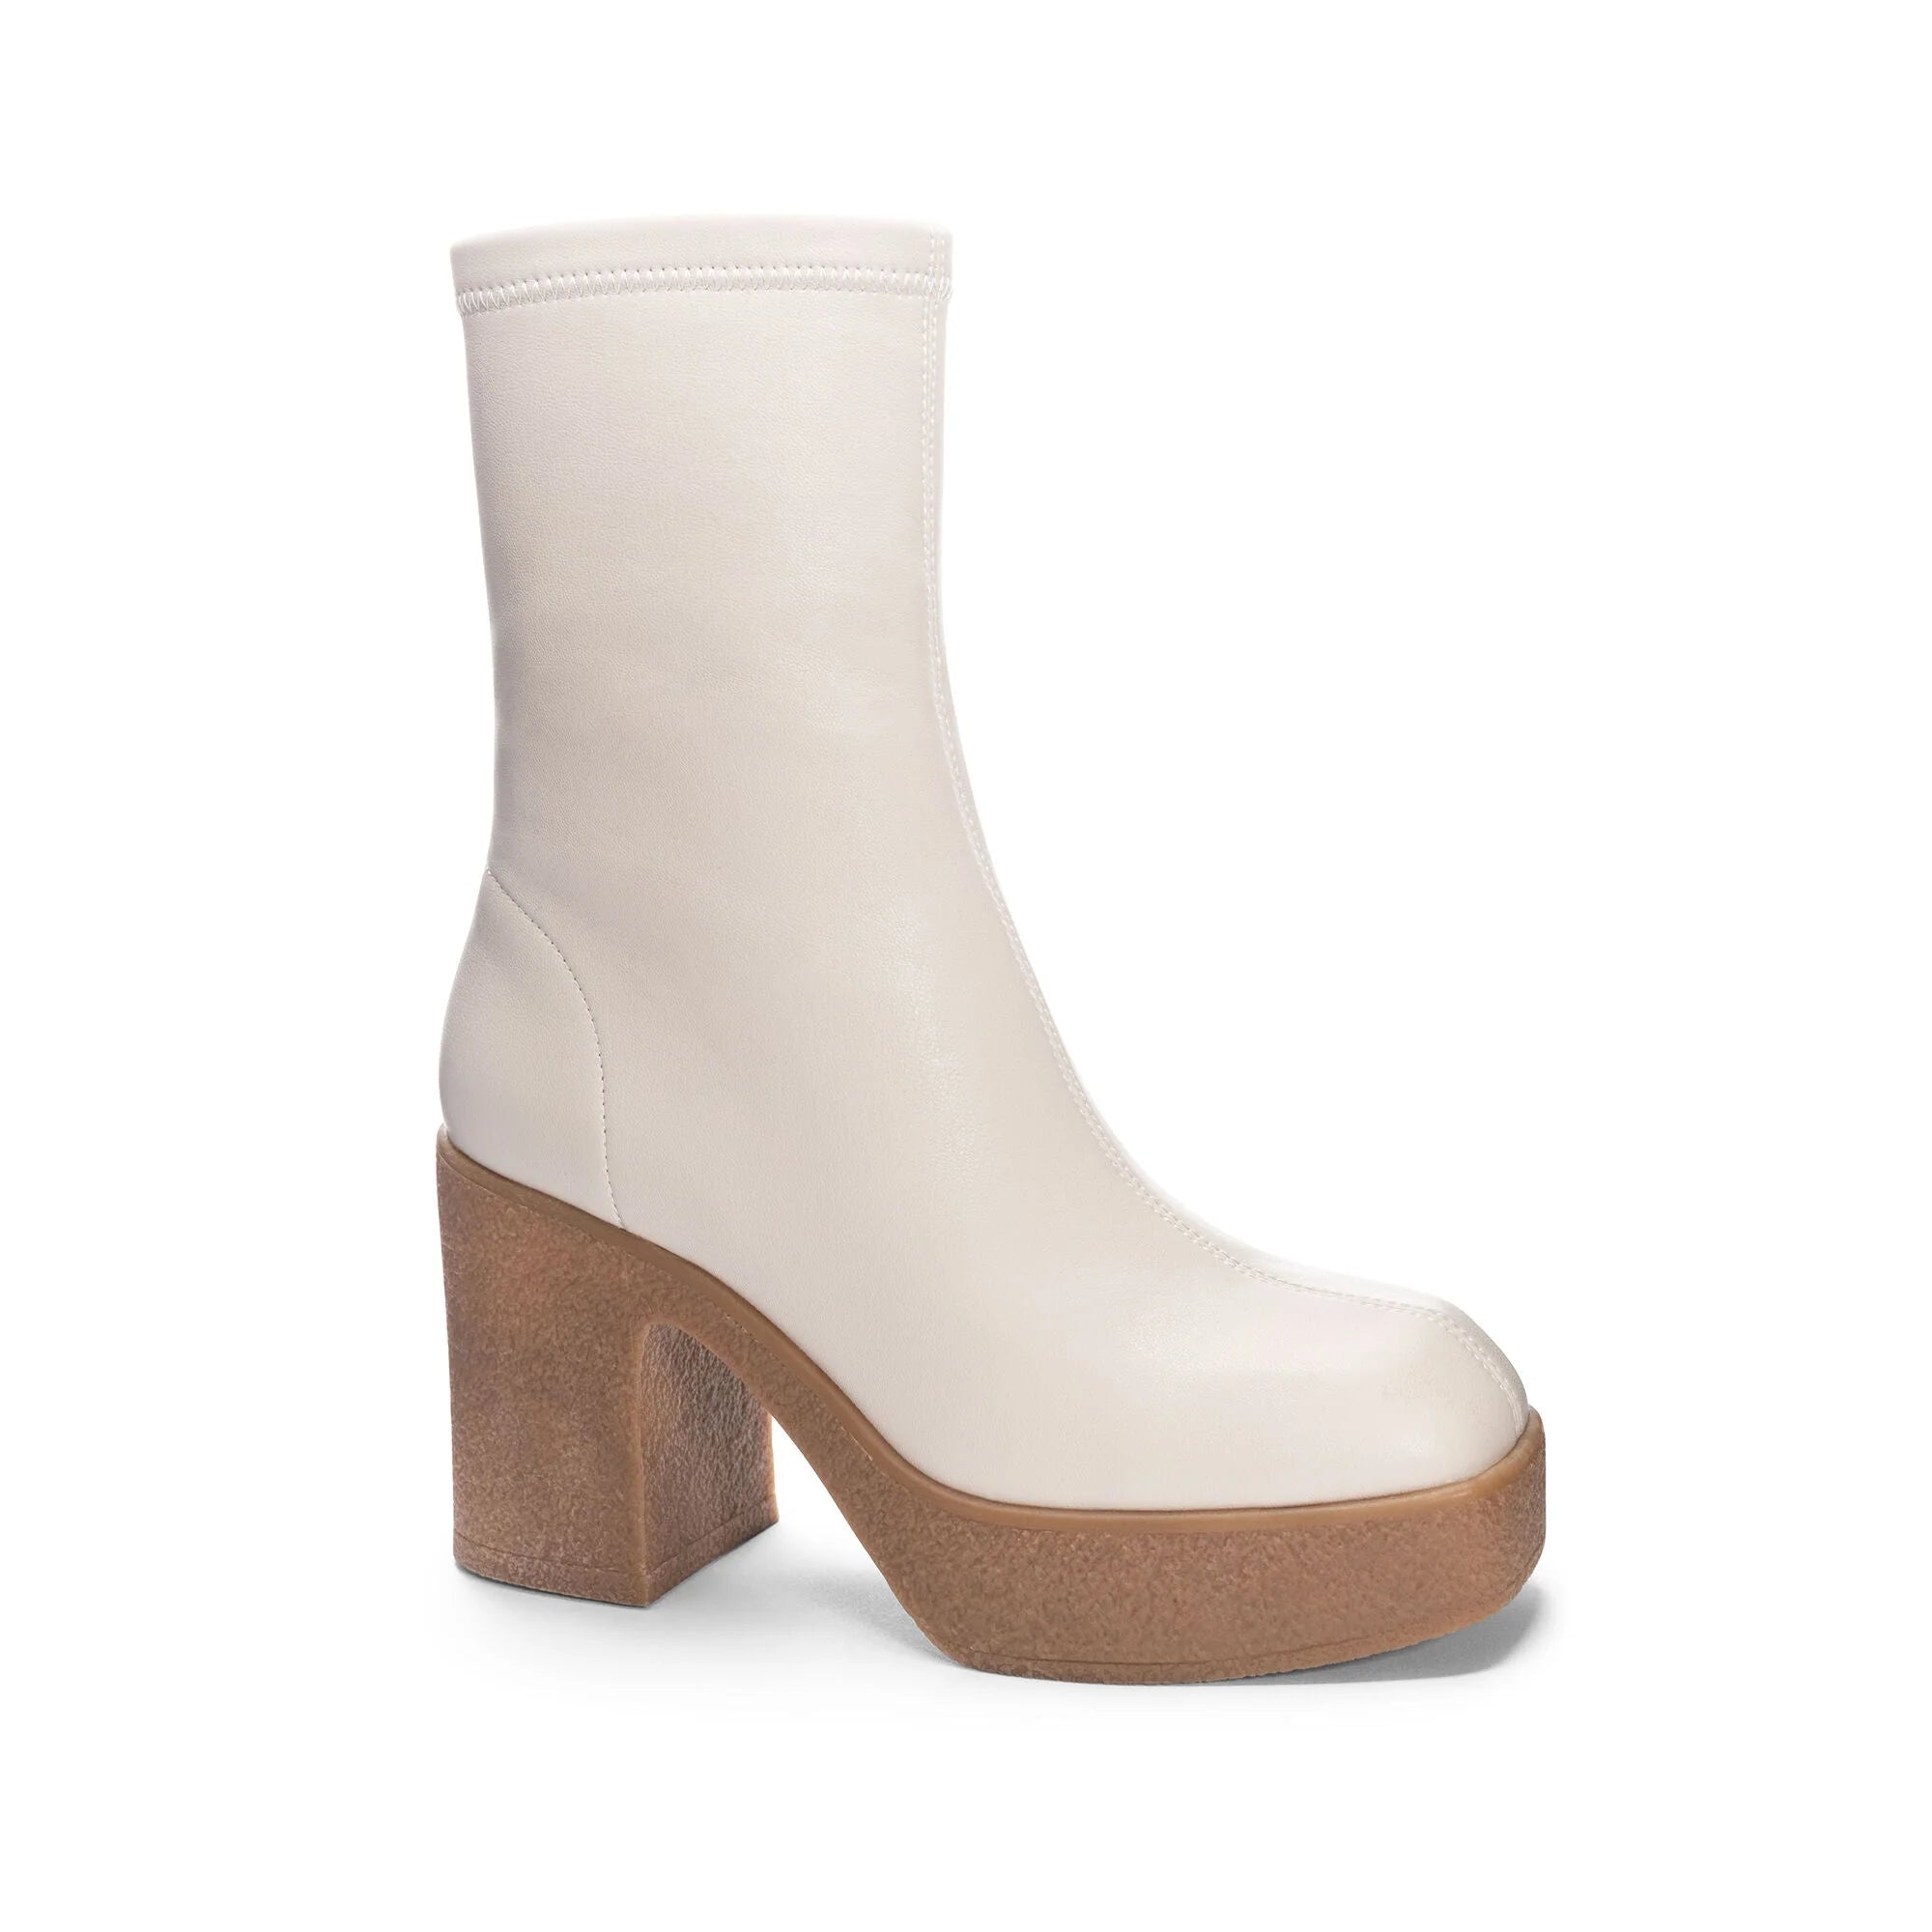 Chinese Laundry Callahan Platform Bootie CRM